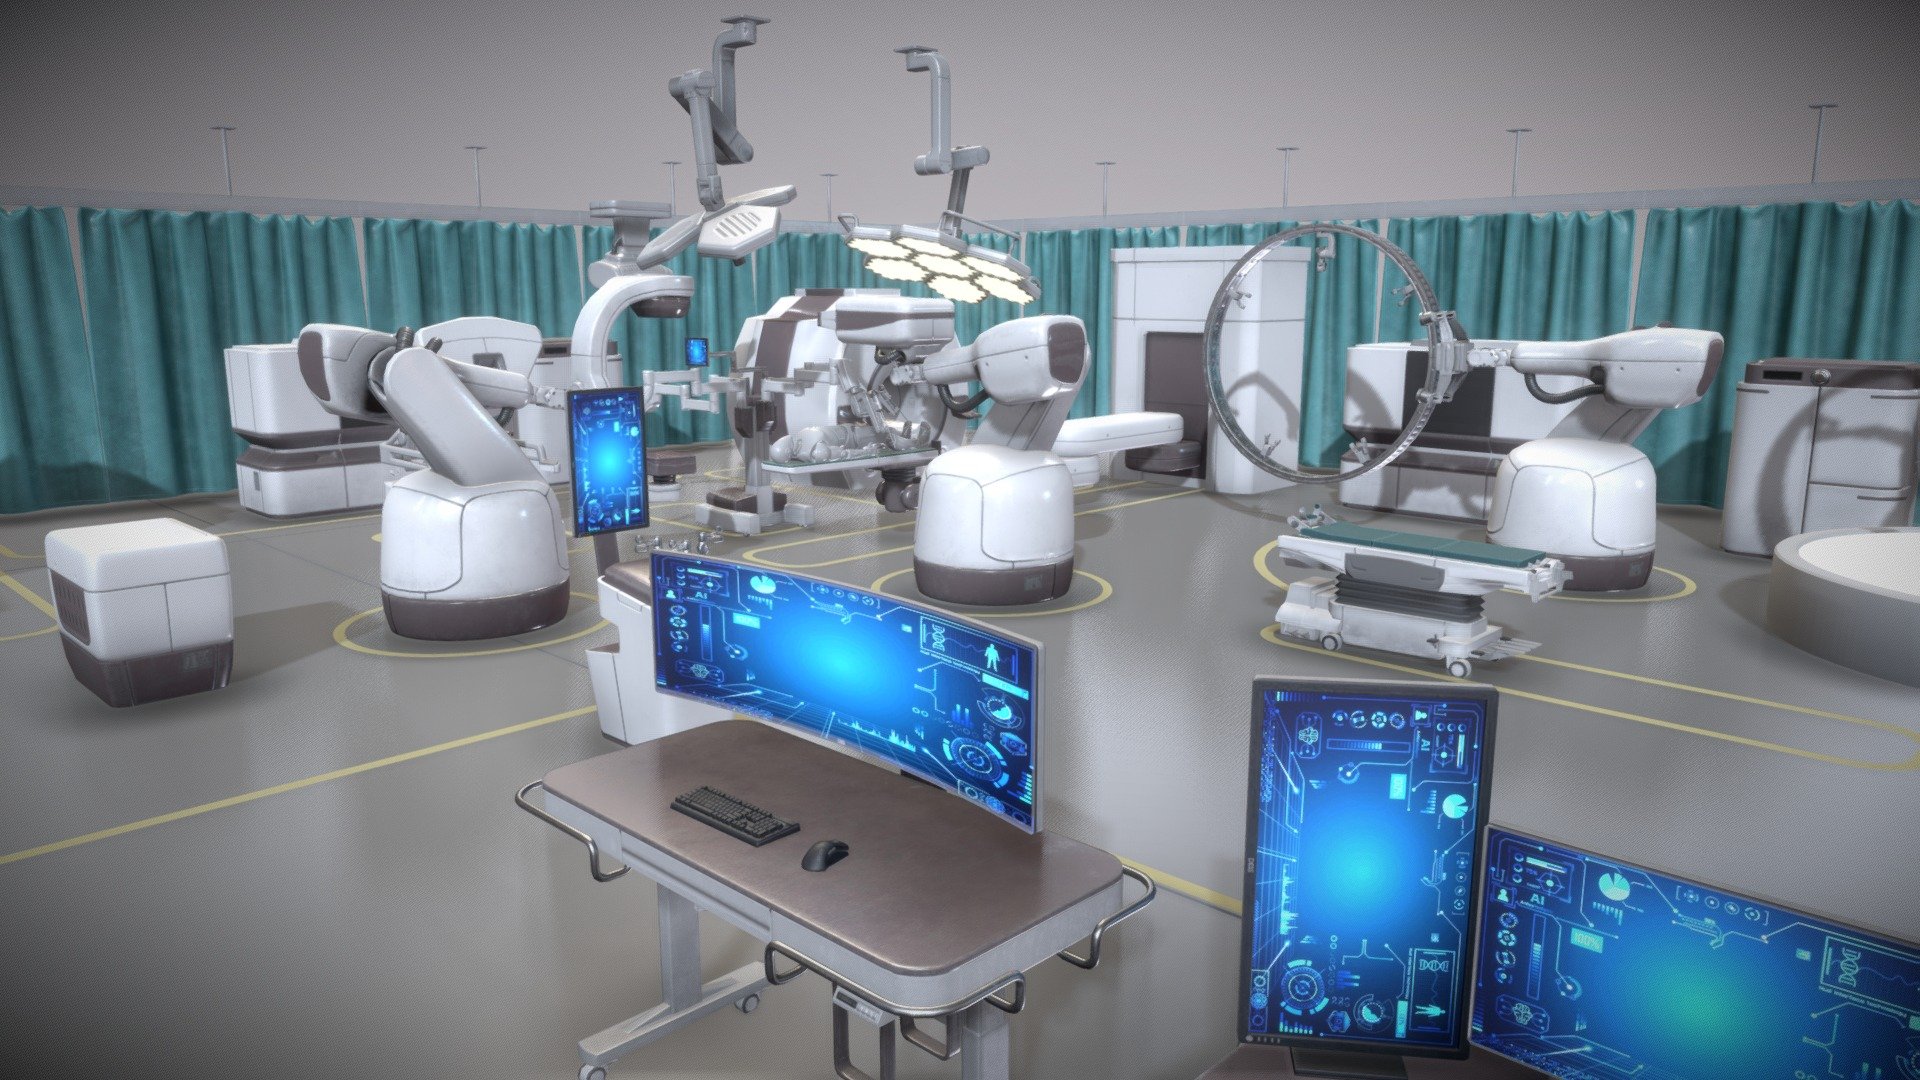 You can buy on the following platforms just type “Medical Equipments”

1) Unity Assetstore 2) Unrealengine Marketplace 3) Cgtrader 4) Turbosquid

Many high-quality models with rick animation of interaction with each other are perfect for rebuilding a medical institution and laboratory
Technical Details
Features
Number of Unique Meshes: 44
Collision: Yes
Vertex Count: 100-10000
LODs: Yes
Number of Materials and Material Instances: 43
Number of Textures: 52
Texture Resolutions: 4096*4096
Supported Development Platforms:
Windows: Yes
Mac: Yes - Medical Equipments - 3D model by VP.Studio3d 3d model